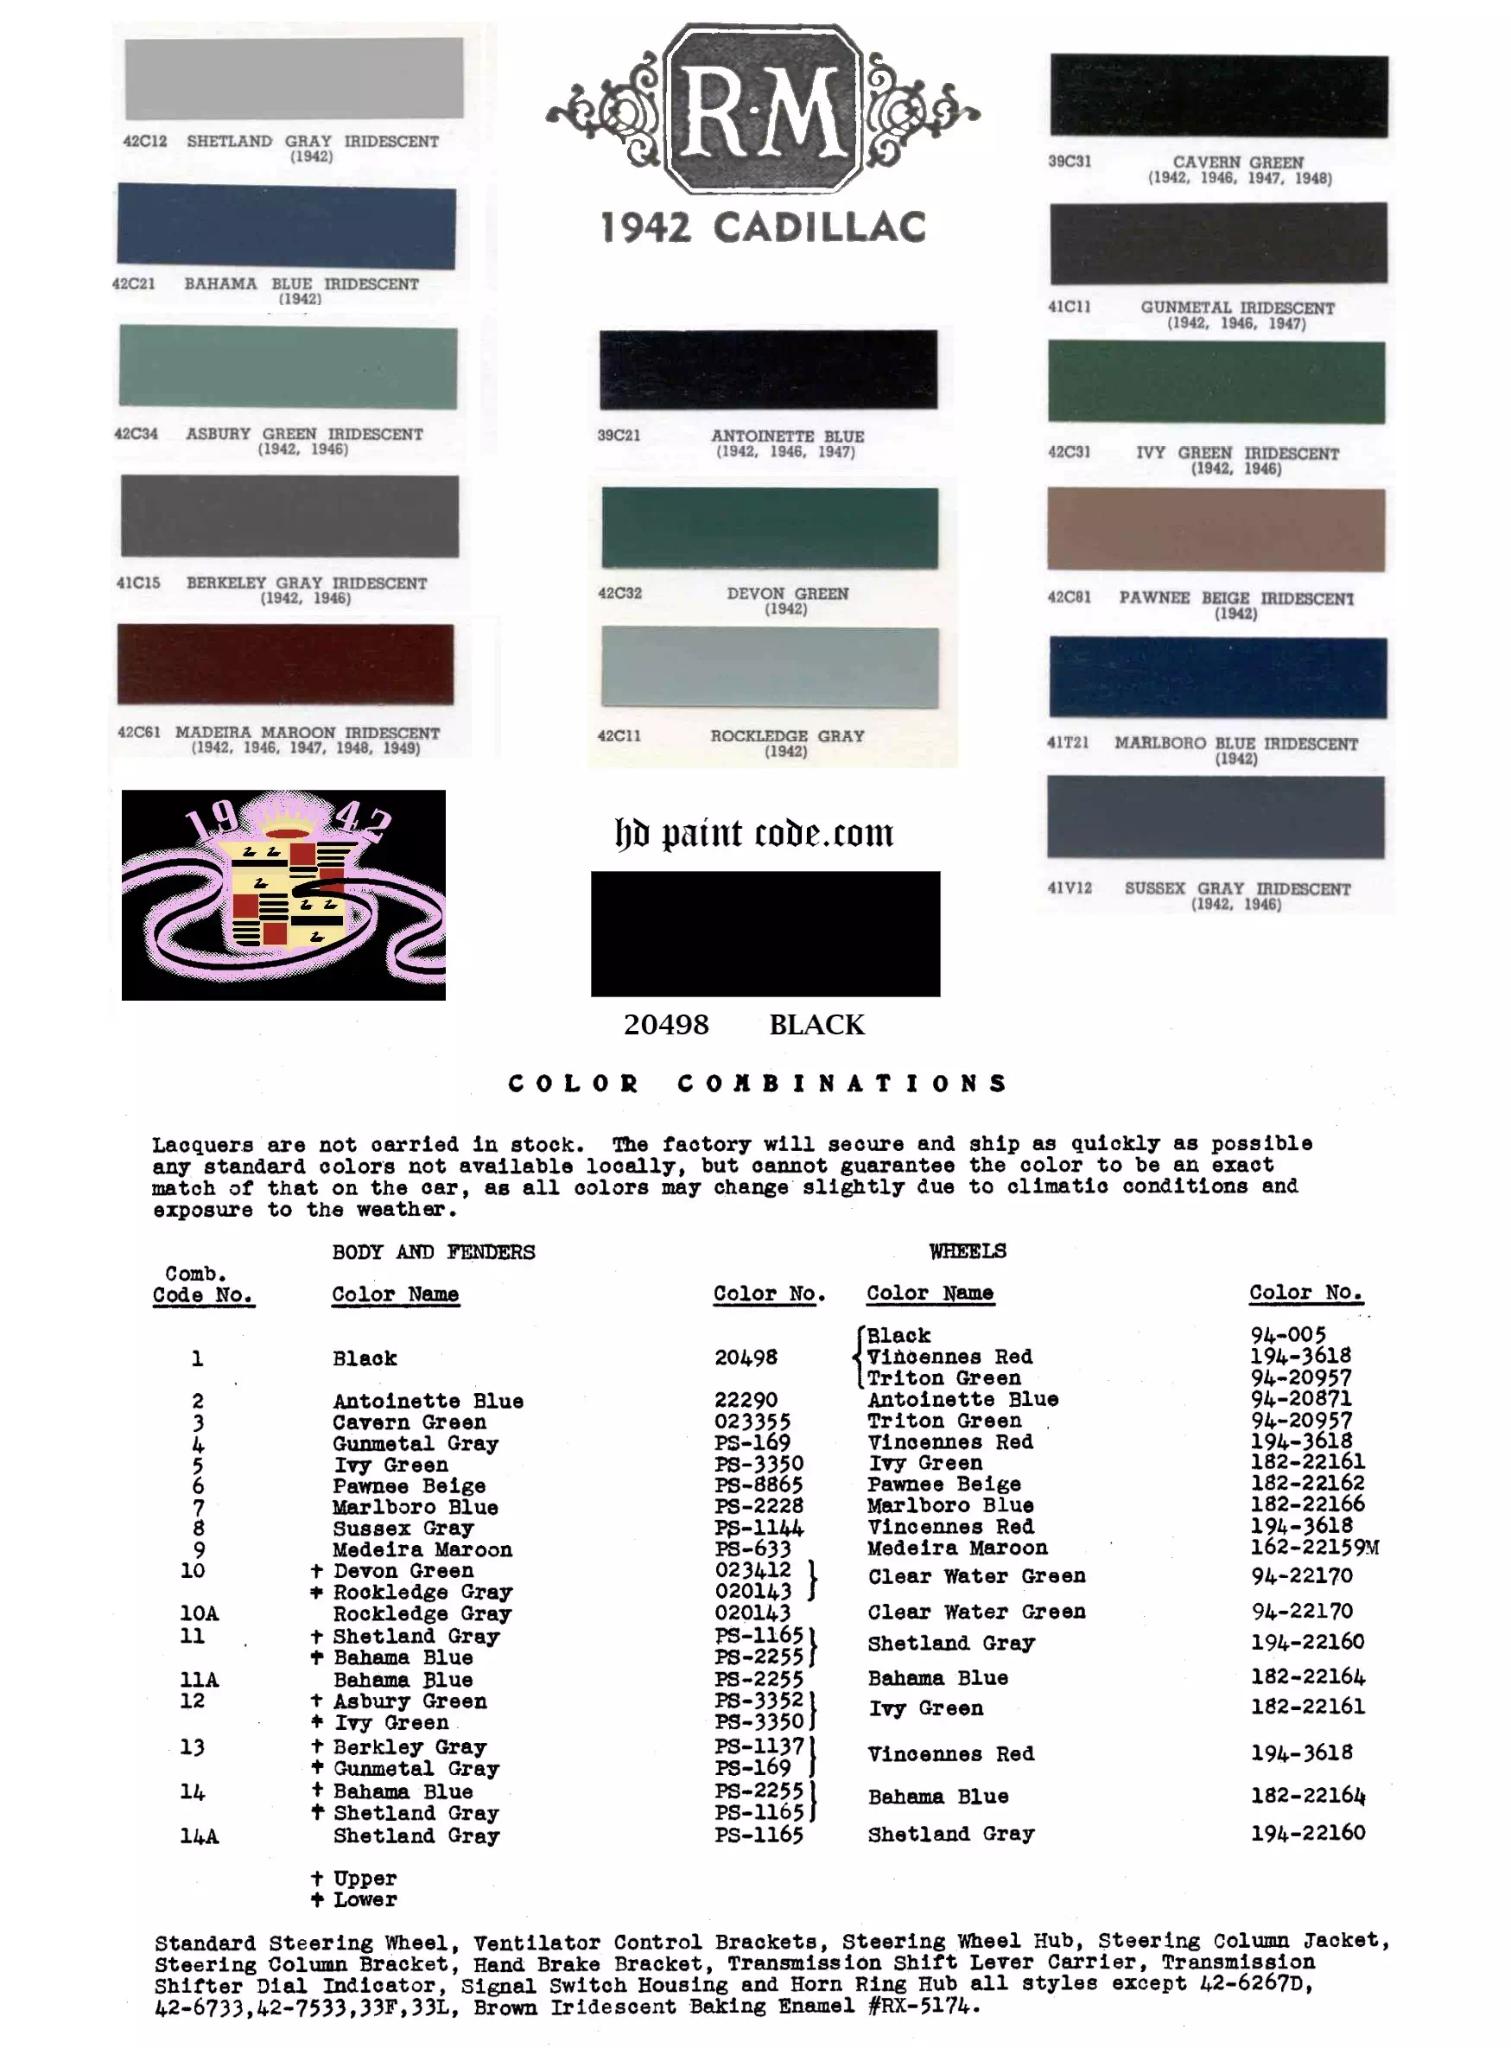 Color Examples and their codes for Cadillac Vehicles